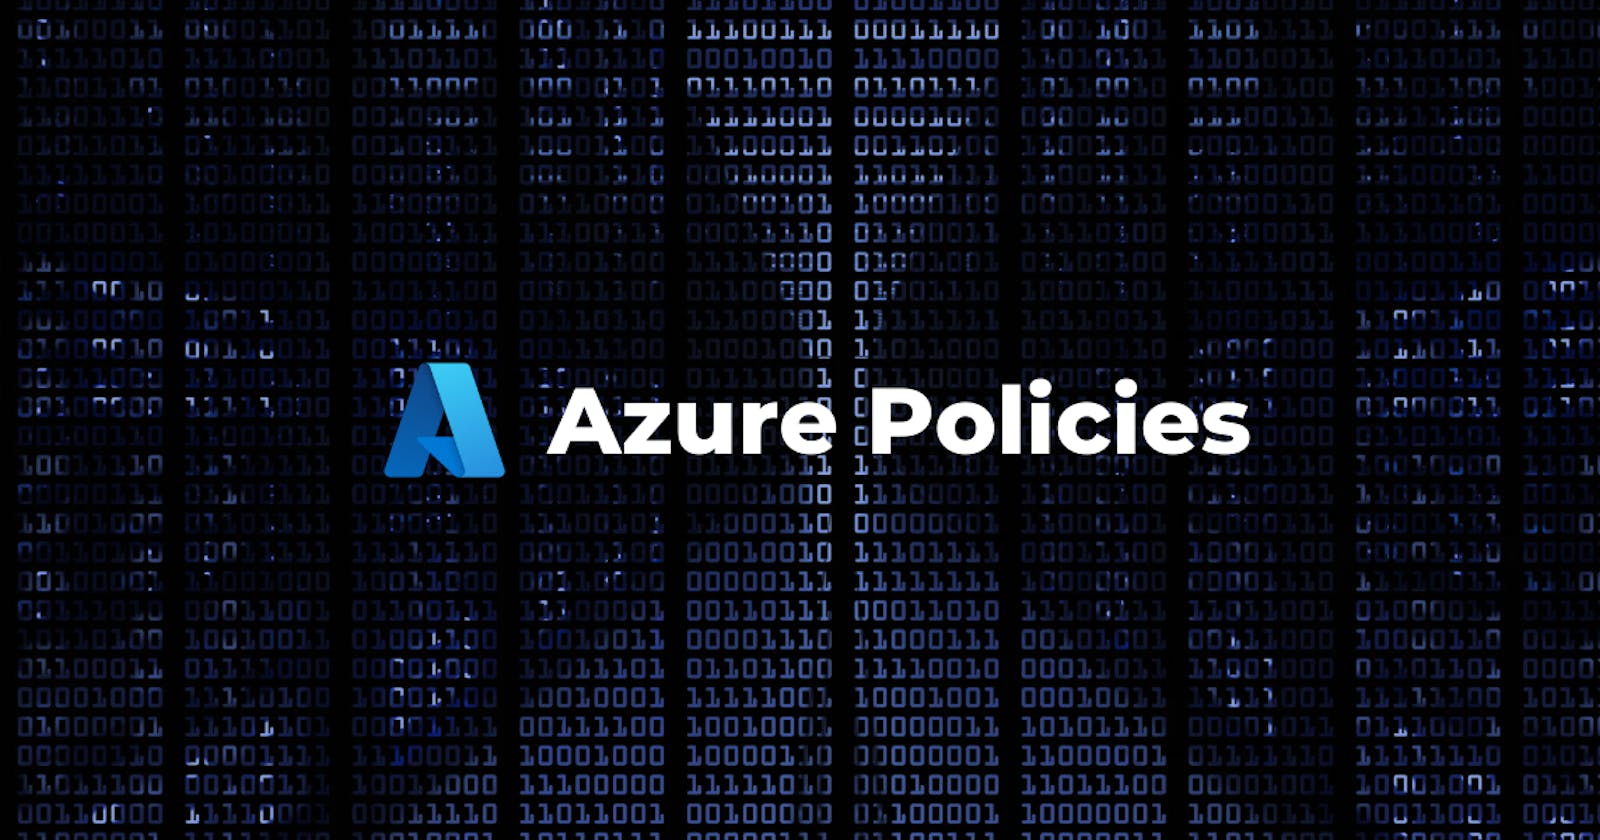 Getting started with Azure Policies